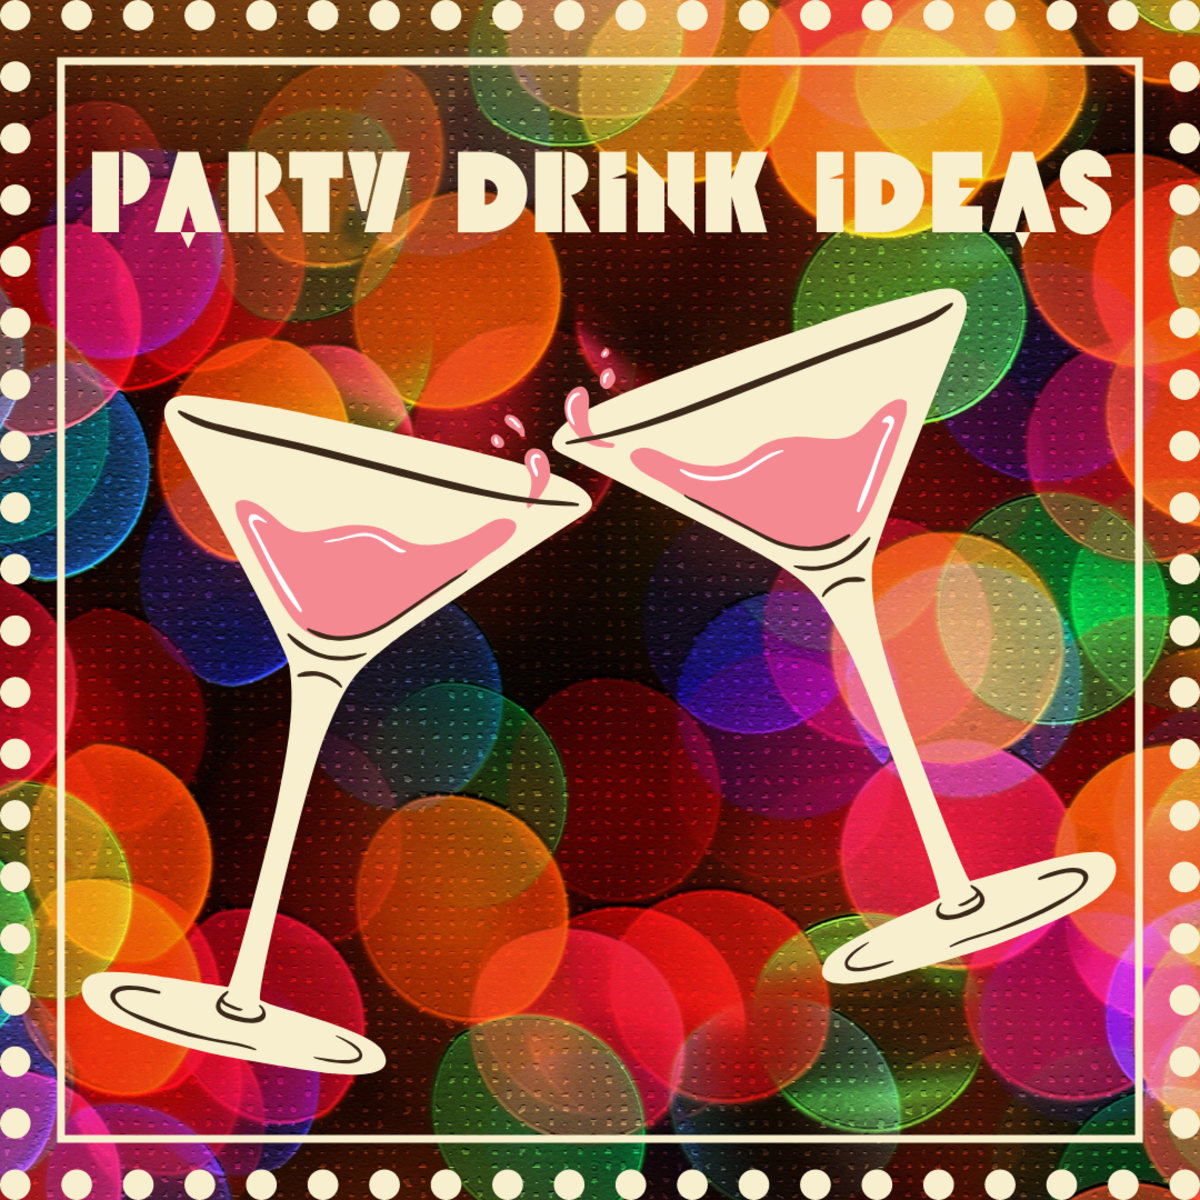 Looking for ideas for party drinks? Look no further!